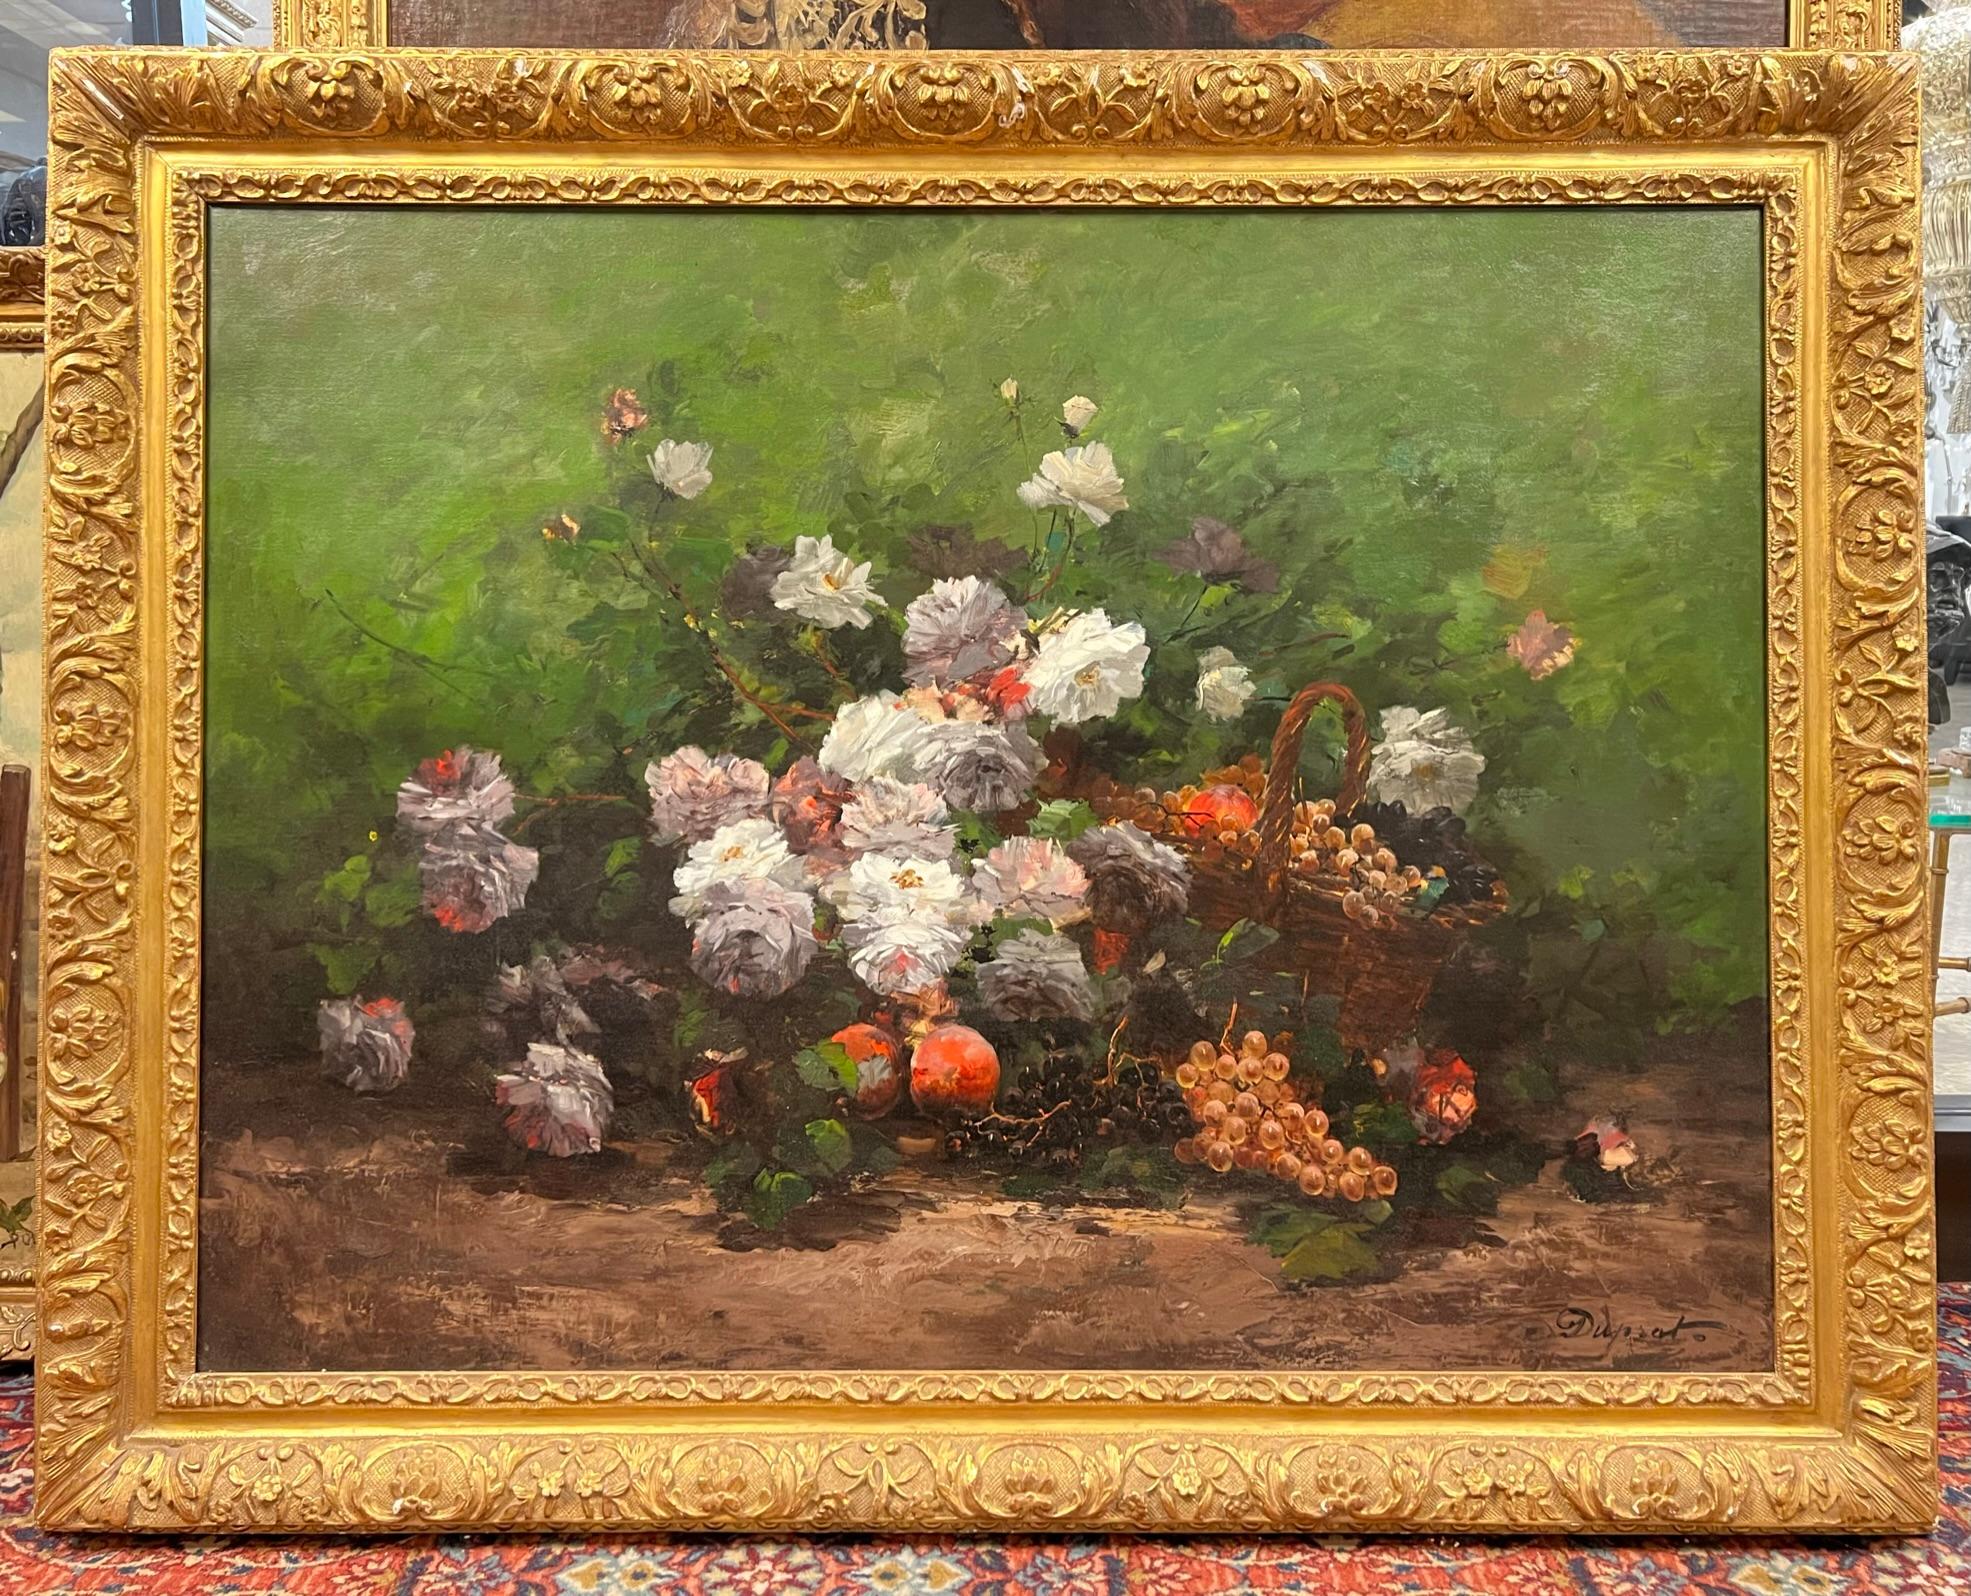 Our beautiful and large still life on canvas depicts harvested grapes and peaches spilling from a woven rattan basket, surrounded by peach tree blossoms in full bloom. Signed Duprat or possibly Duprato. Stretcher approximately 38 by 51 and giltwood